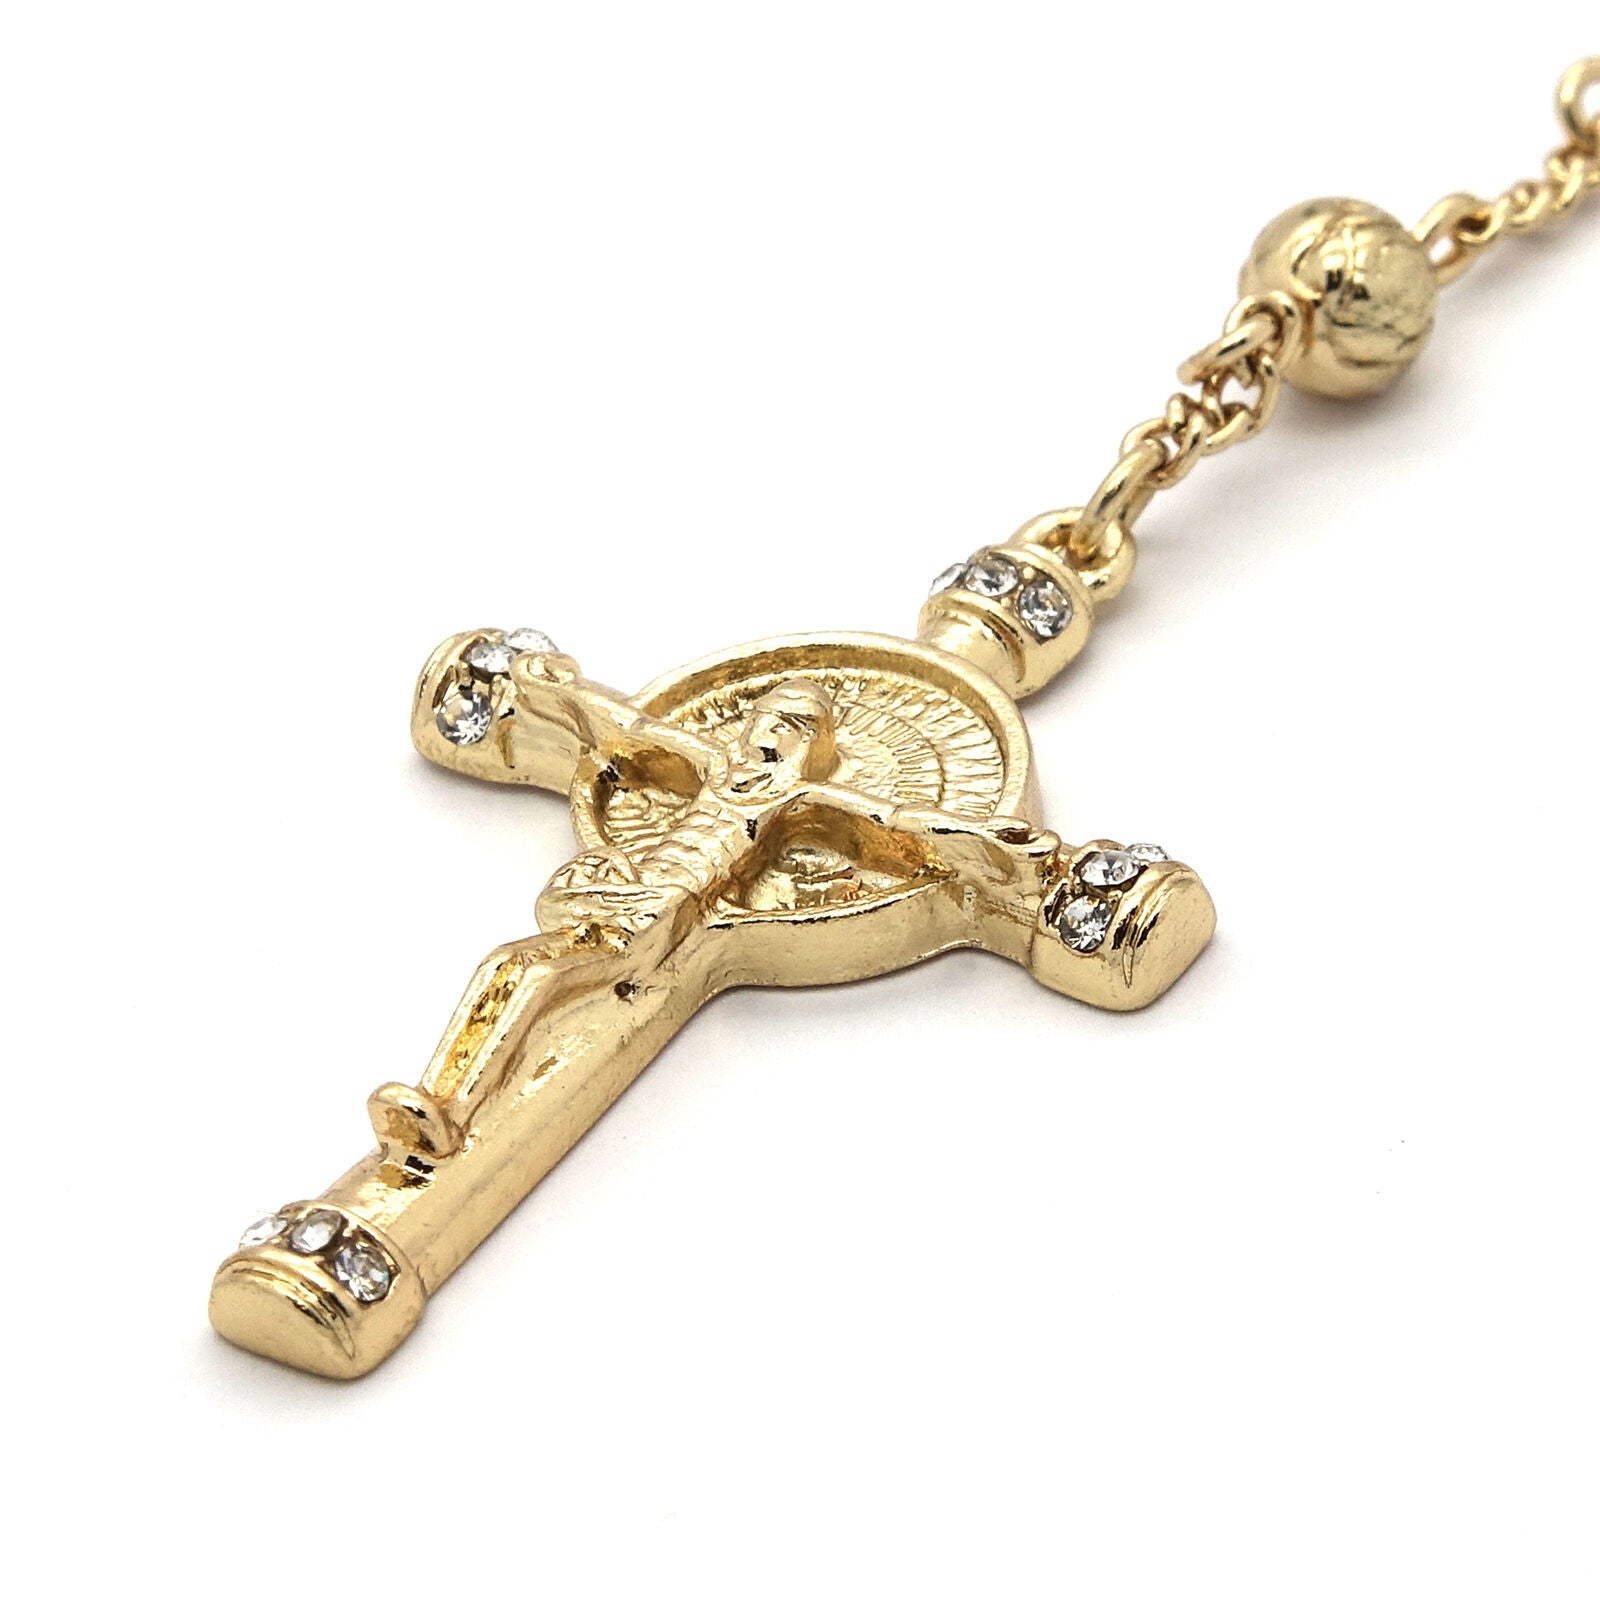 GOLD - BLACK GUADALUPE ROSARY